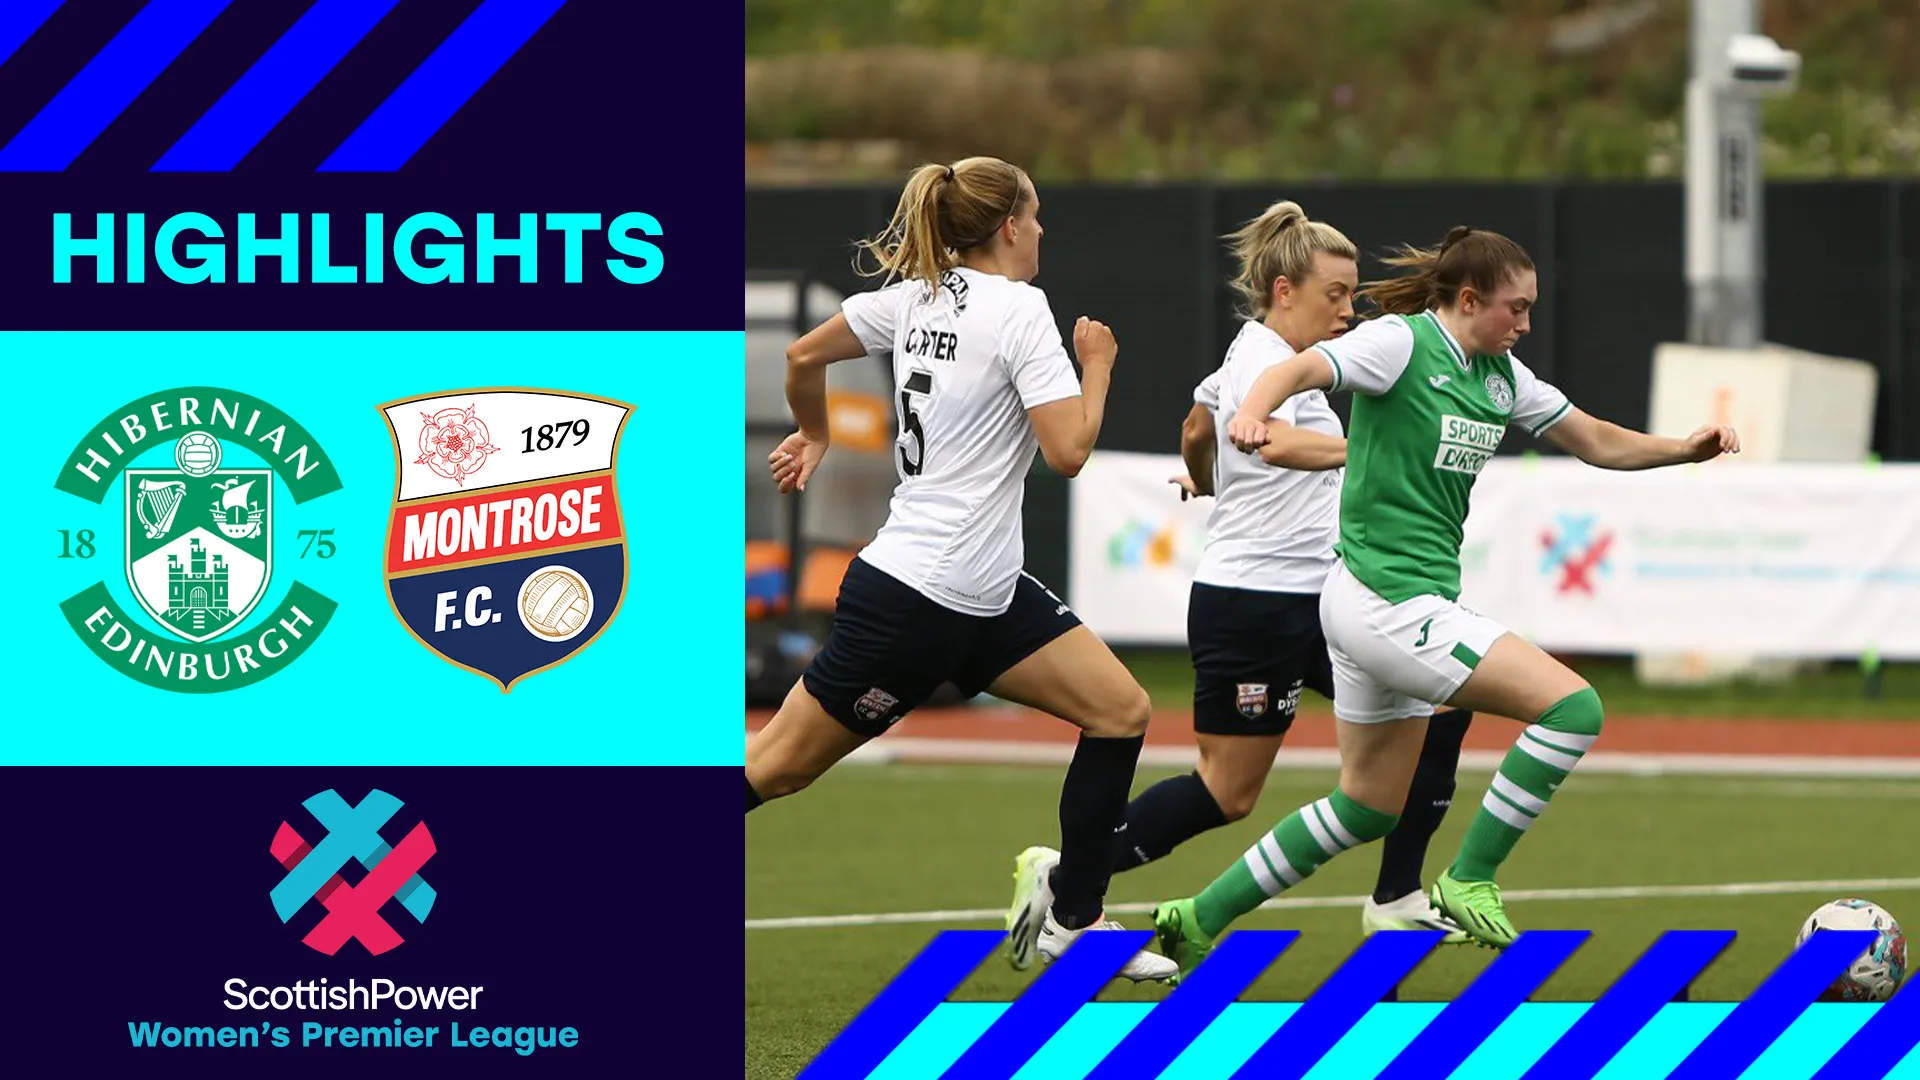 Image for Hibernian 4-1 Montrose | Hibs pick up first win of the season over newly promoted Montrose | SWPL